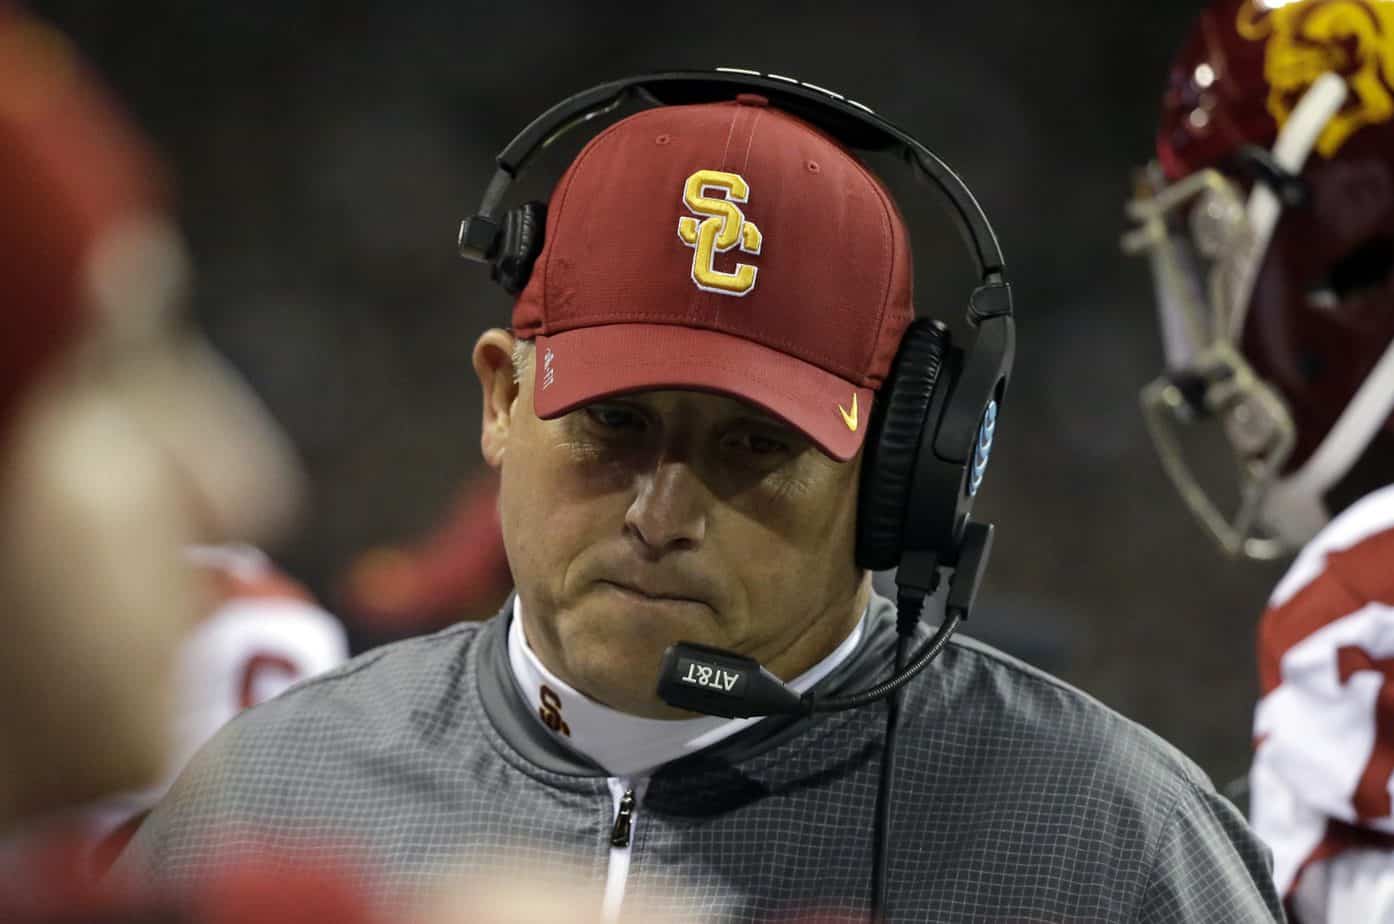 Fans swarmed social media after it was announced that Clay Helton has been fired by USC following an embarrassing loss to Stanford on Saturday